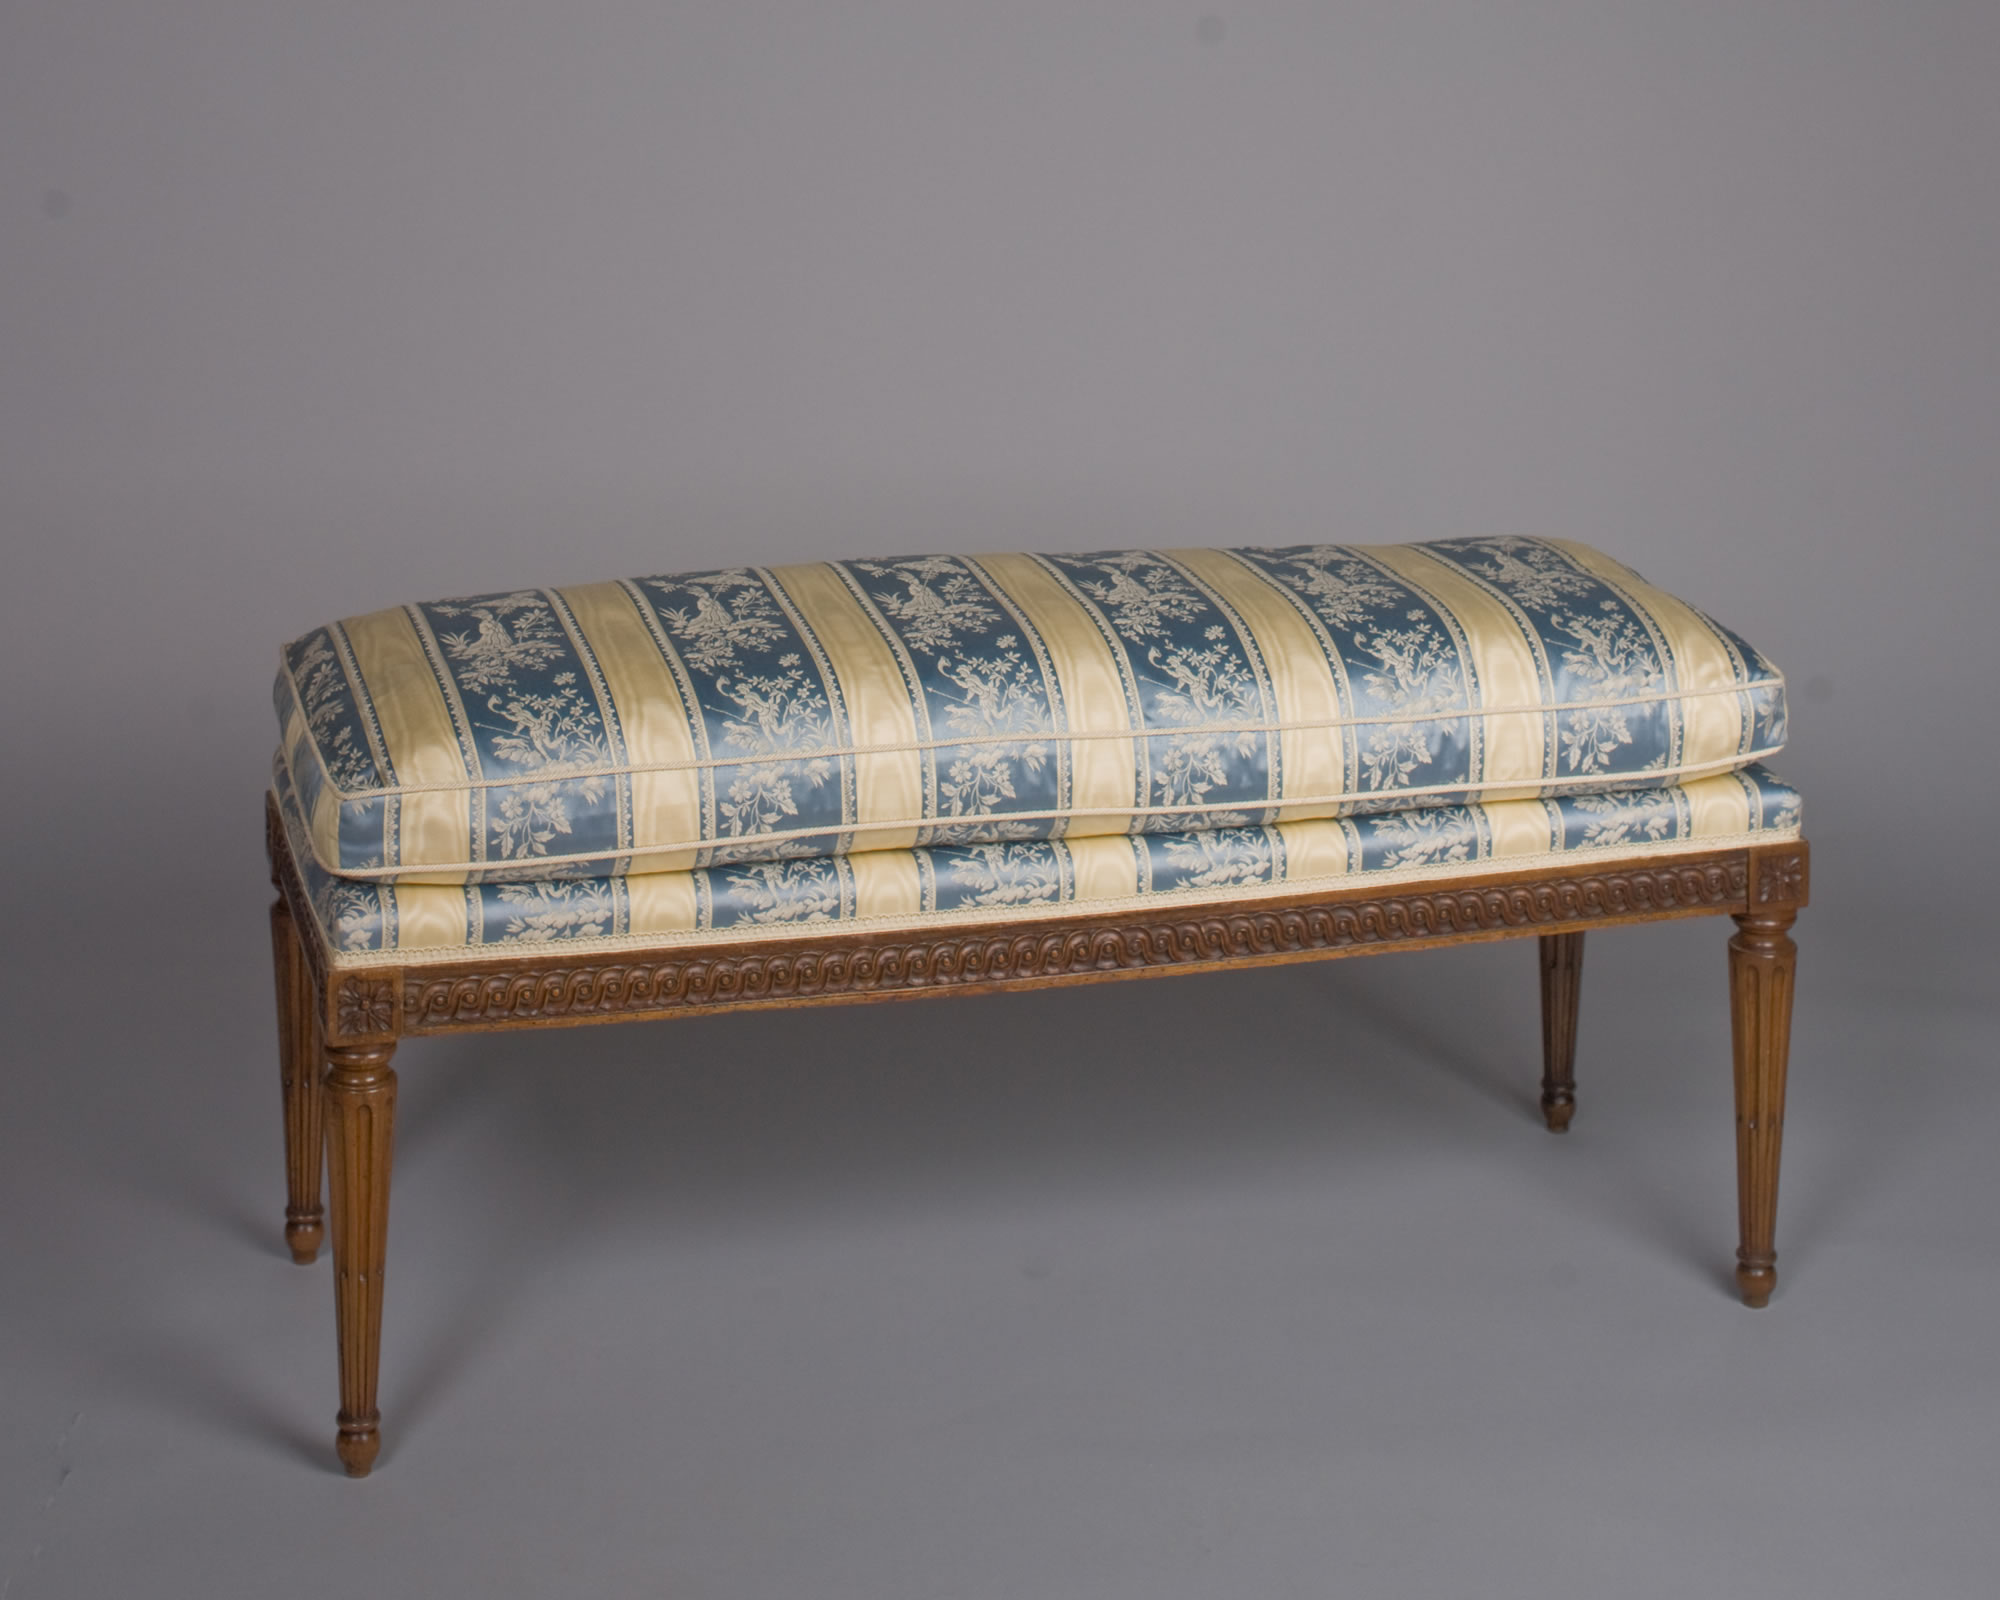 French Louis XVI Period, Beechwood Banquette Stamped by Jean-Baptiste Boulard